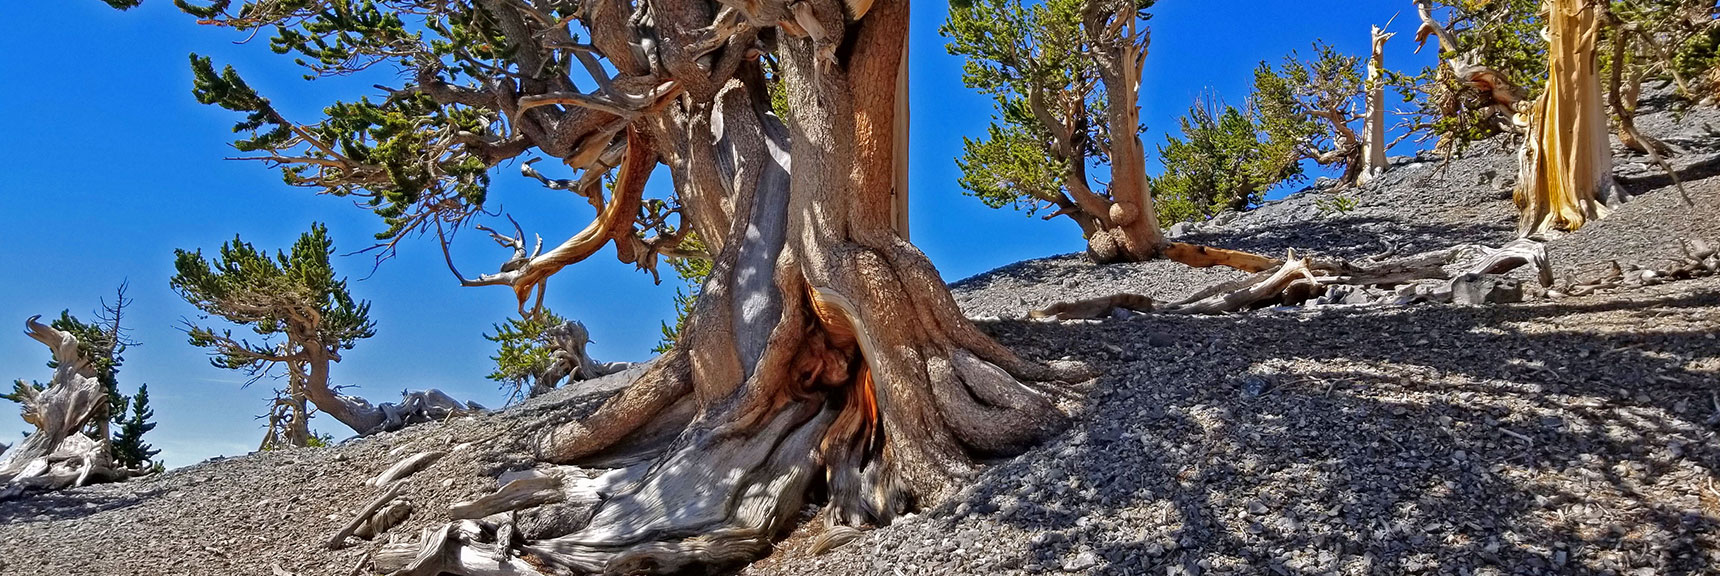 More Bristlecone Pine Sculptures, Now on the Stretch Between Mummy's Knees and Toe. | Grand Circuit Loop Cougar Ridge Trail, Mummy Mountain Knees | Mummy Mountain Toe | Mummy Springs | Raintree | Fletcher Peak | Mt Charleston Wilderness | Spring Mountains, Nevada